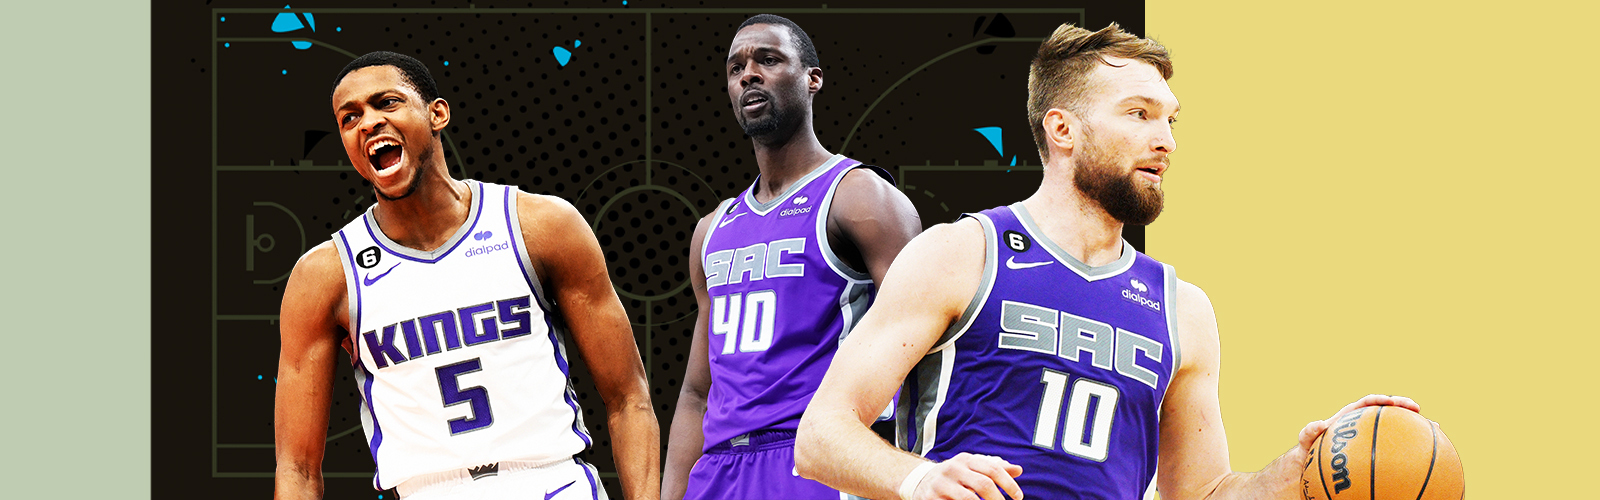 Sacramento Kings: An updated look at the projected starting lineup/rotation